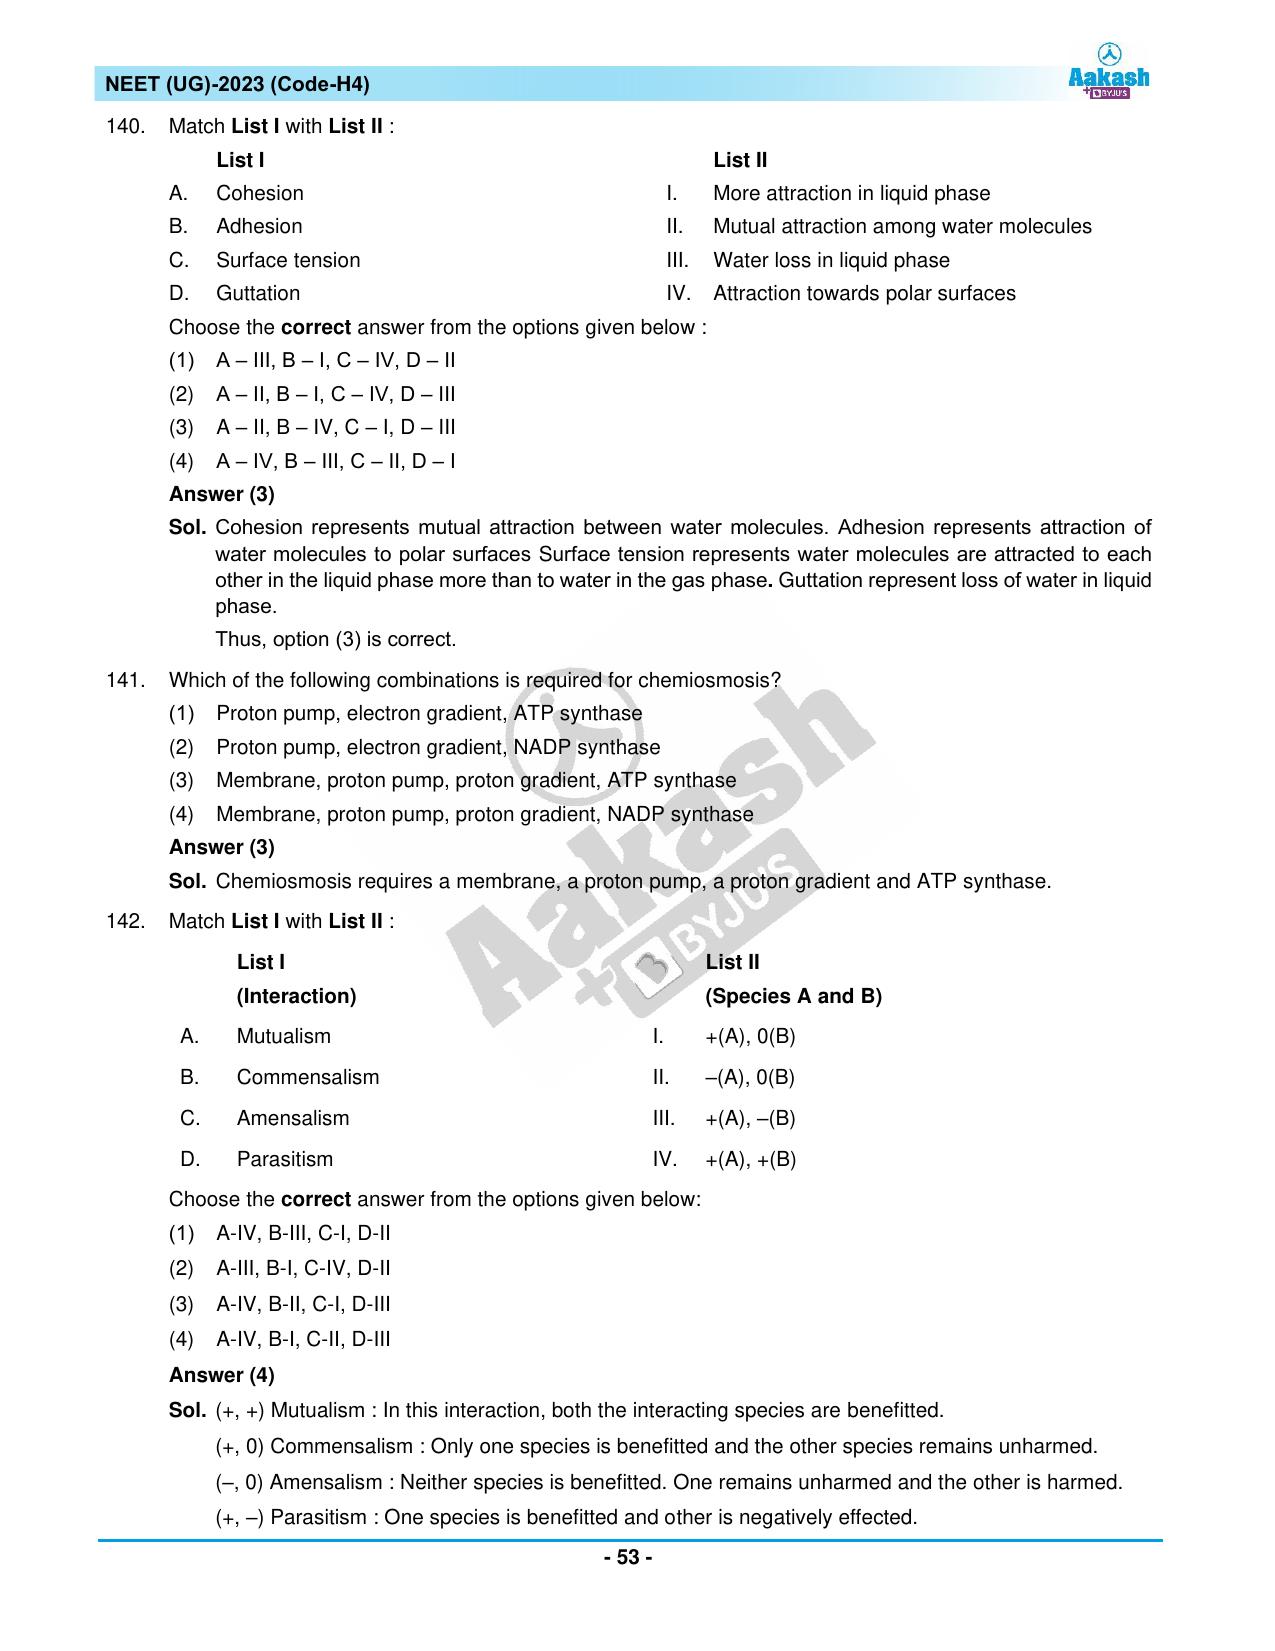 NEET 2023 Question Paper H4 - Page 53